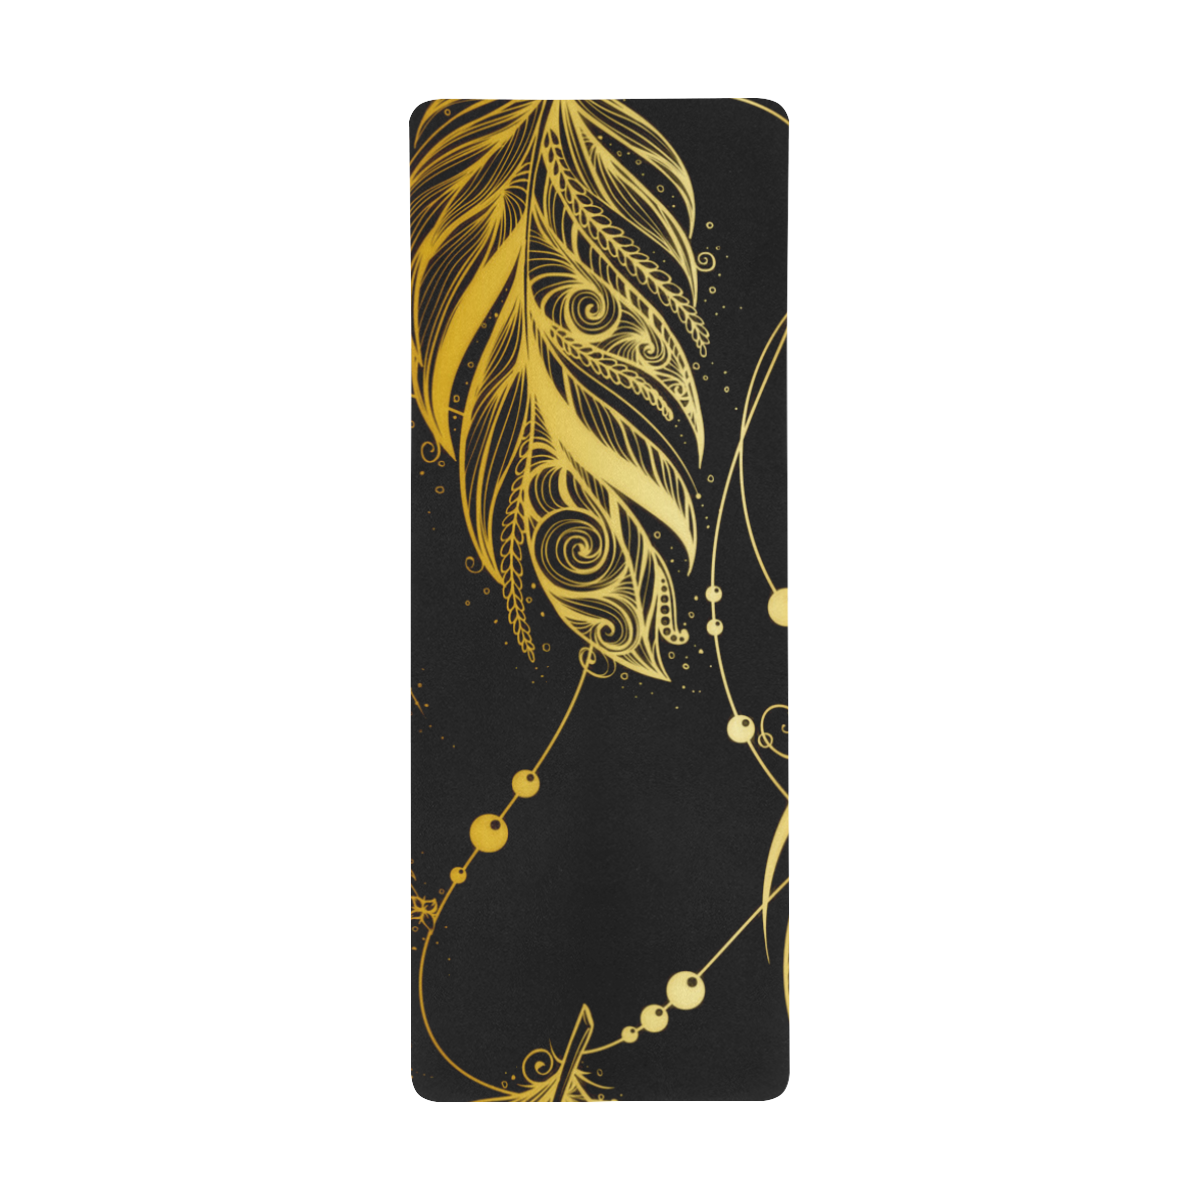 Golden Feathers Gaming Mousepad (31"x12")